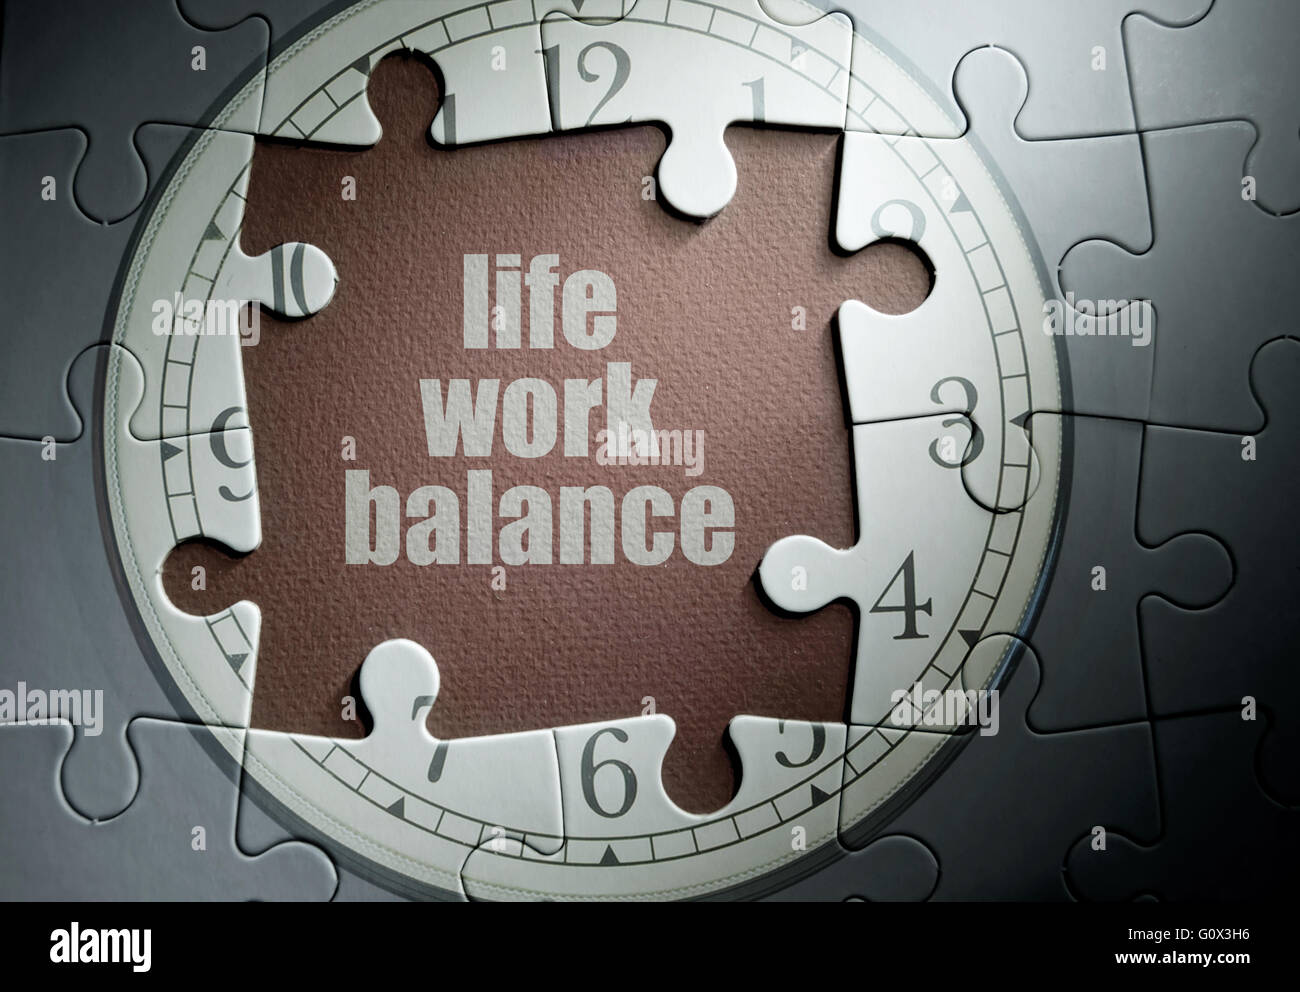 Life work balance missing piece from a clock jigsaw puzzle Stock Photo